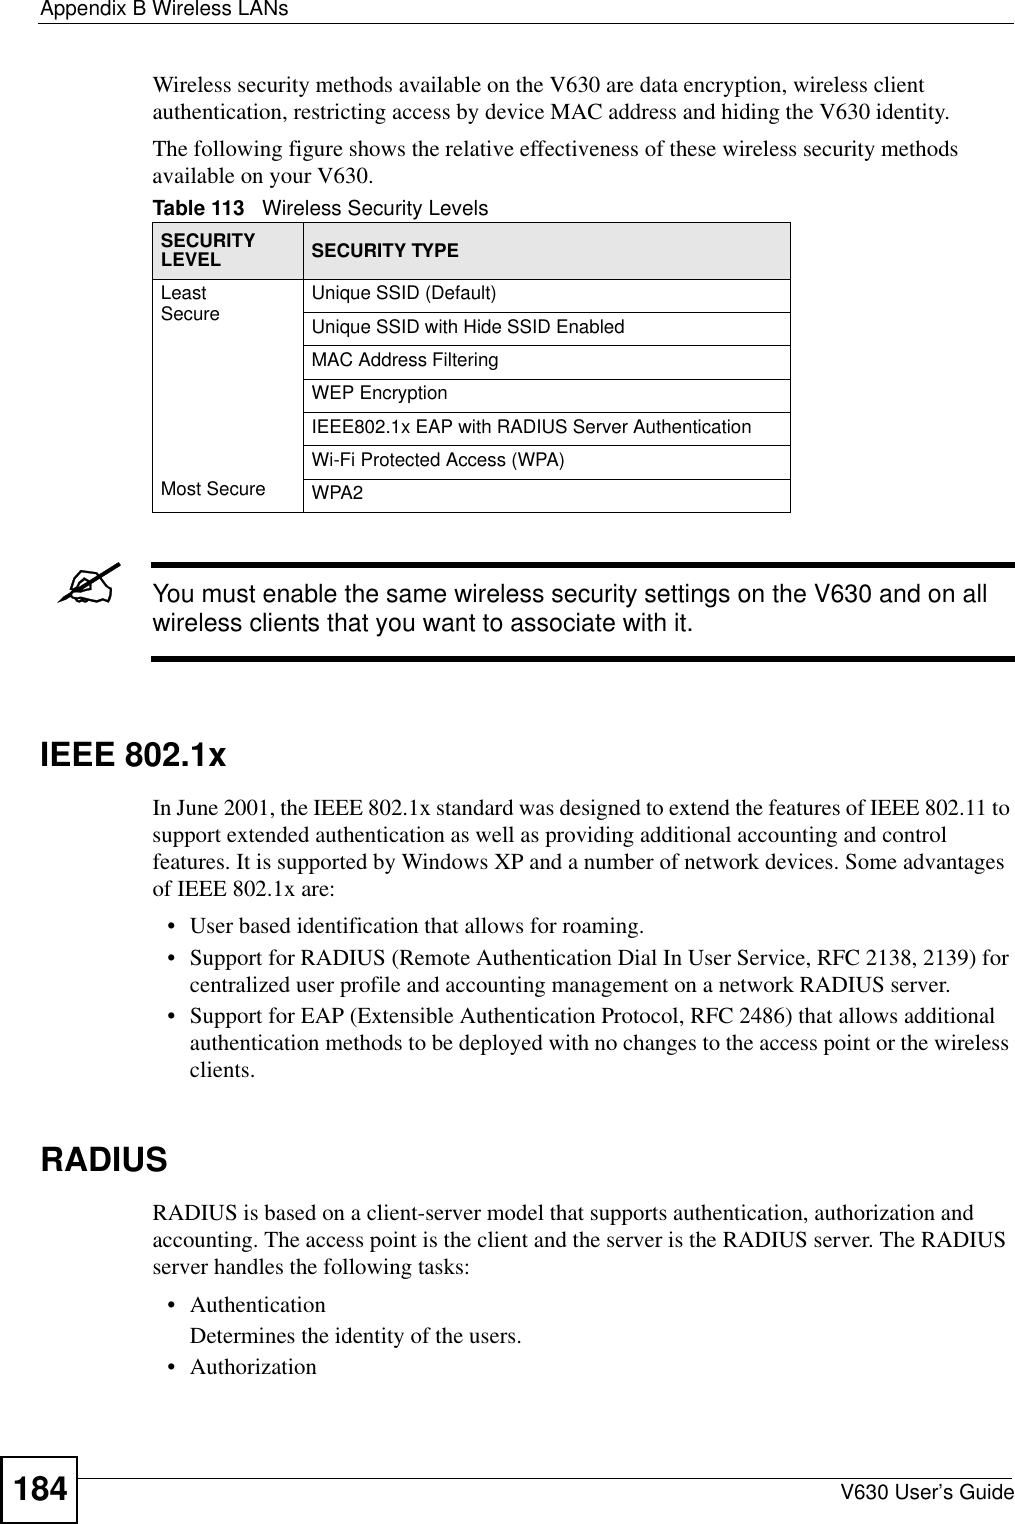 Appendix B Wireless LANsV630 User’s Guide184Wireless security methods available on the V630 are data encryption, wireless client authentication, restricting access by device MAC address and hiding the V630 identity.The following figure shows the relative effectiveness of these wireless security methods available on your V630.&quot;You must enable the same wireless security settings on the V630 and on all wireless clients that you want to associate with it. IEEE 802.1xIn June 2001, the IEEE 802.1x standard was designed to extend the features of IEEE 802.11 to support extended authentication as well as providing additional accounting and control features. It is supported by Windows XP and a number of network devices. Some advantages of IEEE 802.1x are:• User based identification that allows for roaming.• Support for RADIUS (Remote Authentication Dial In User Service, RFC 2138, 2139) for centralized user profile and accounting management on a network RADIUS server. • Support for EAP (Extensible Authentication Protocol, RFC 2486) that allows additional authentication methods to be deployed with no changes to the access point or the wireless clients. RADIUSRADIUS is based on a client-server model that supports authentication, authorization and accounting. The access point is the client and the server is the RADIUS server. The RADIUS server handles the following tasks:• Authentication Determines the identity of the users.• AuthorizationTable 113   Wireless Security LevelsSECURITY LEVEL SECURITY TYPELeast       S e c u r e                                                                                      Most SecureUnique SSID (Default)Unique SSID with Hide SSID EnabledMAC Address FilteringWEP EncryptionIEEE802.1x EAP with RADIUS Server AuthenticationWi-Fi Protected Access (WPA)WPA2